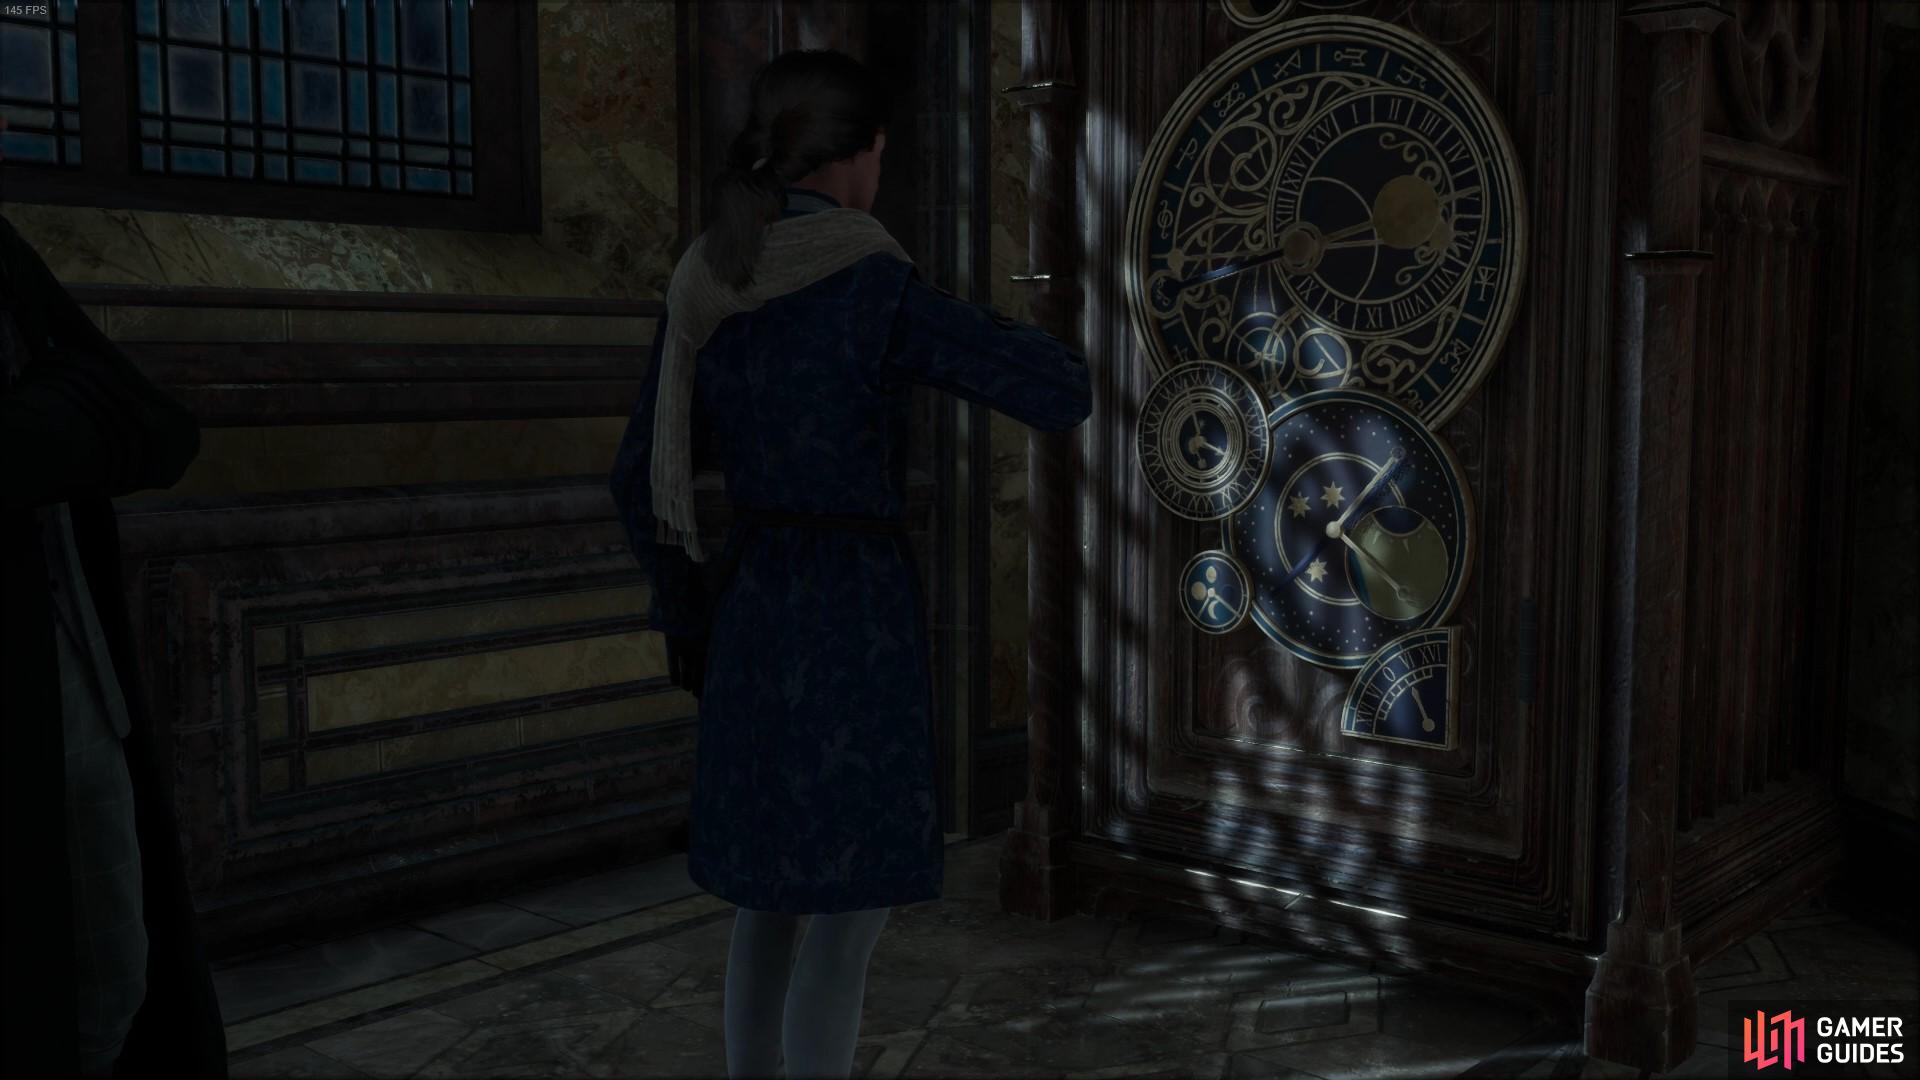 Here is a walkthrough to the Shadows in the Undercroft quest in Hogwarts Legacy.